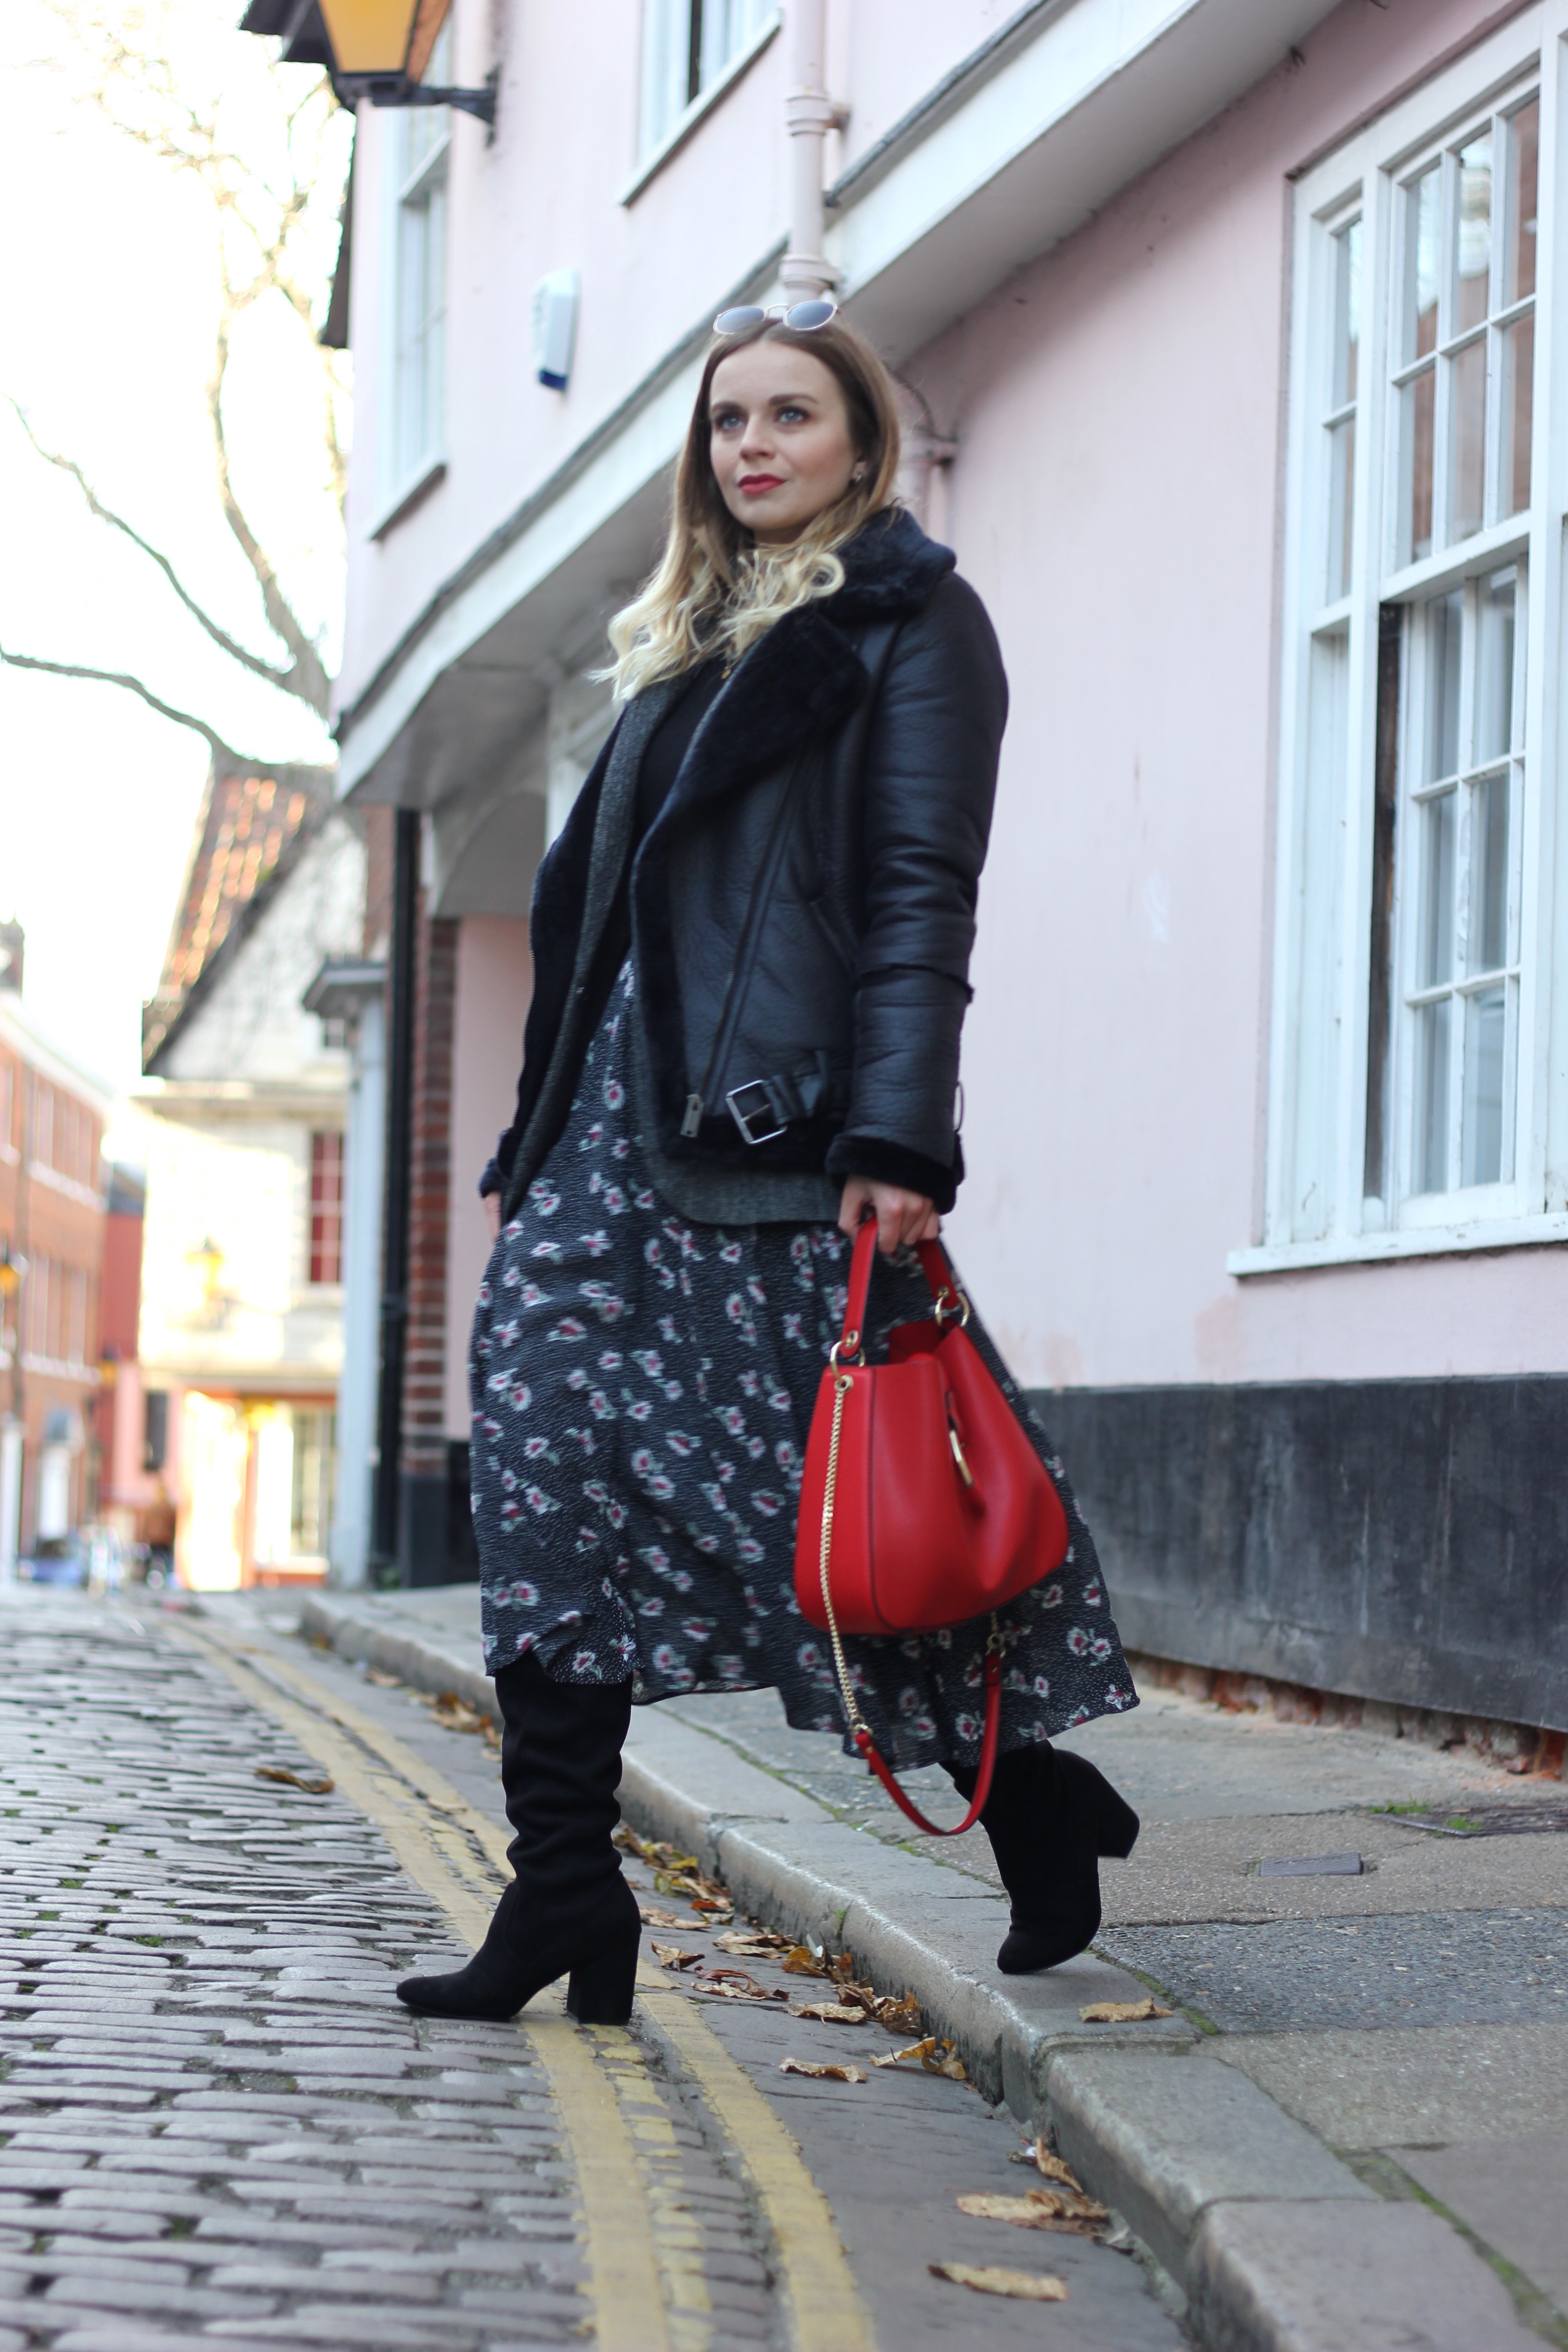 How to Style a Midi Dress in Winter - stylishly good vibes